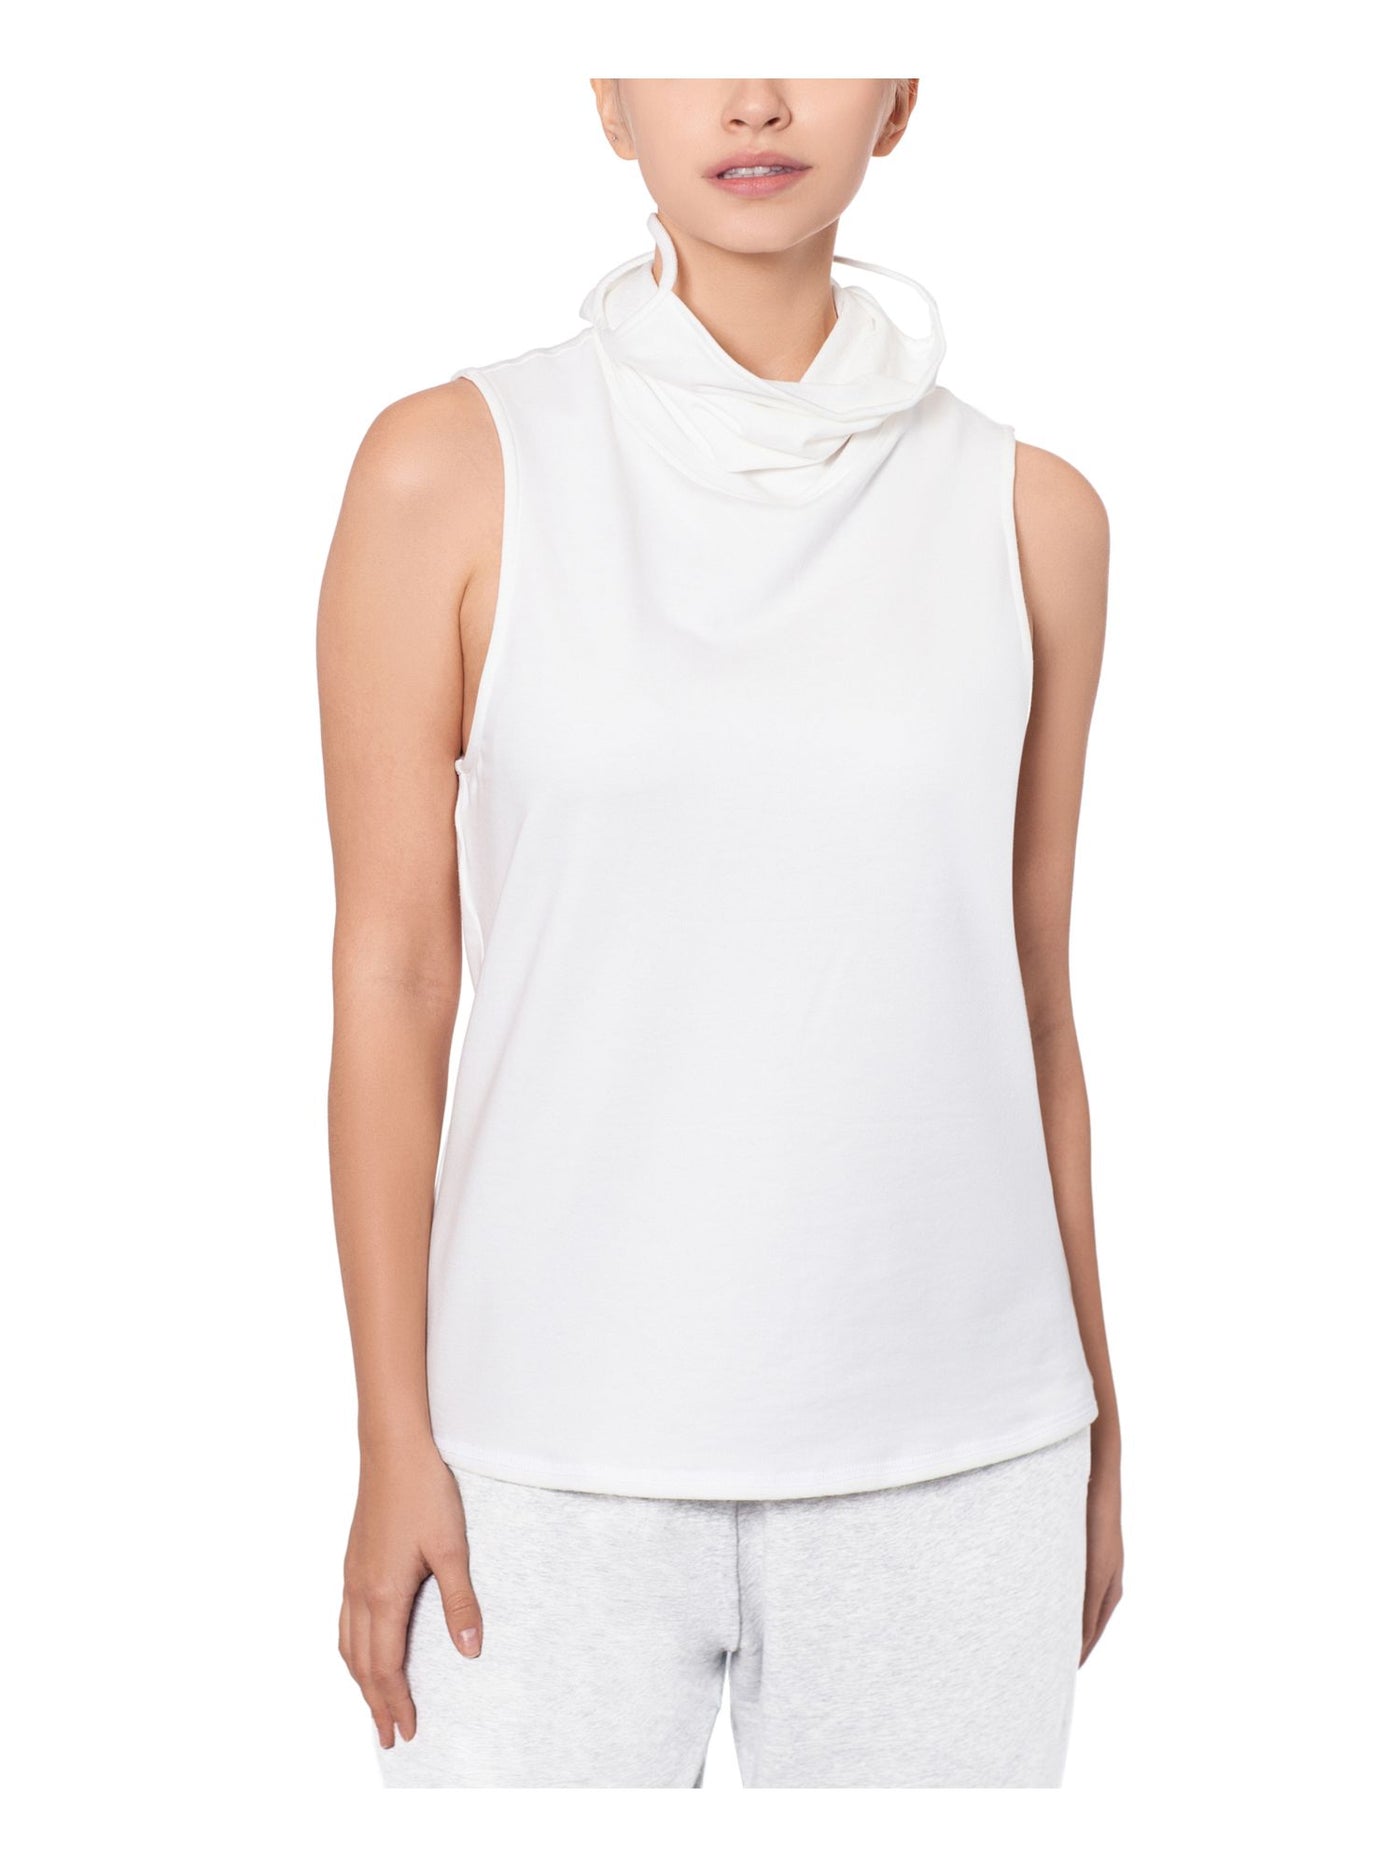 BAM BY BETSY & ADAM Womens White Cotton Blend Sleeveless Cowl Neck Tank Top L